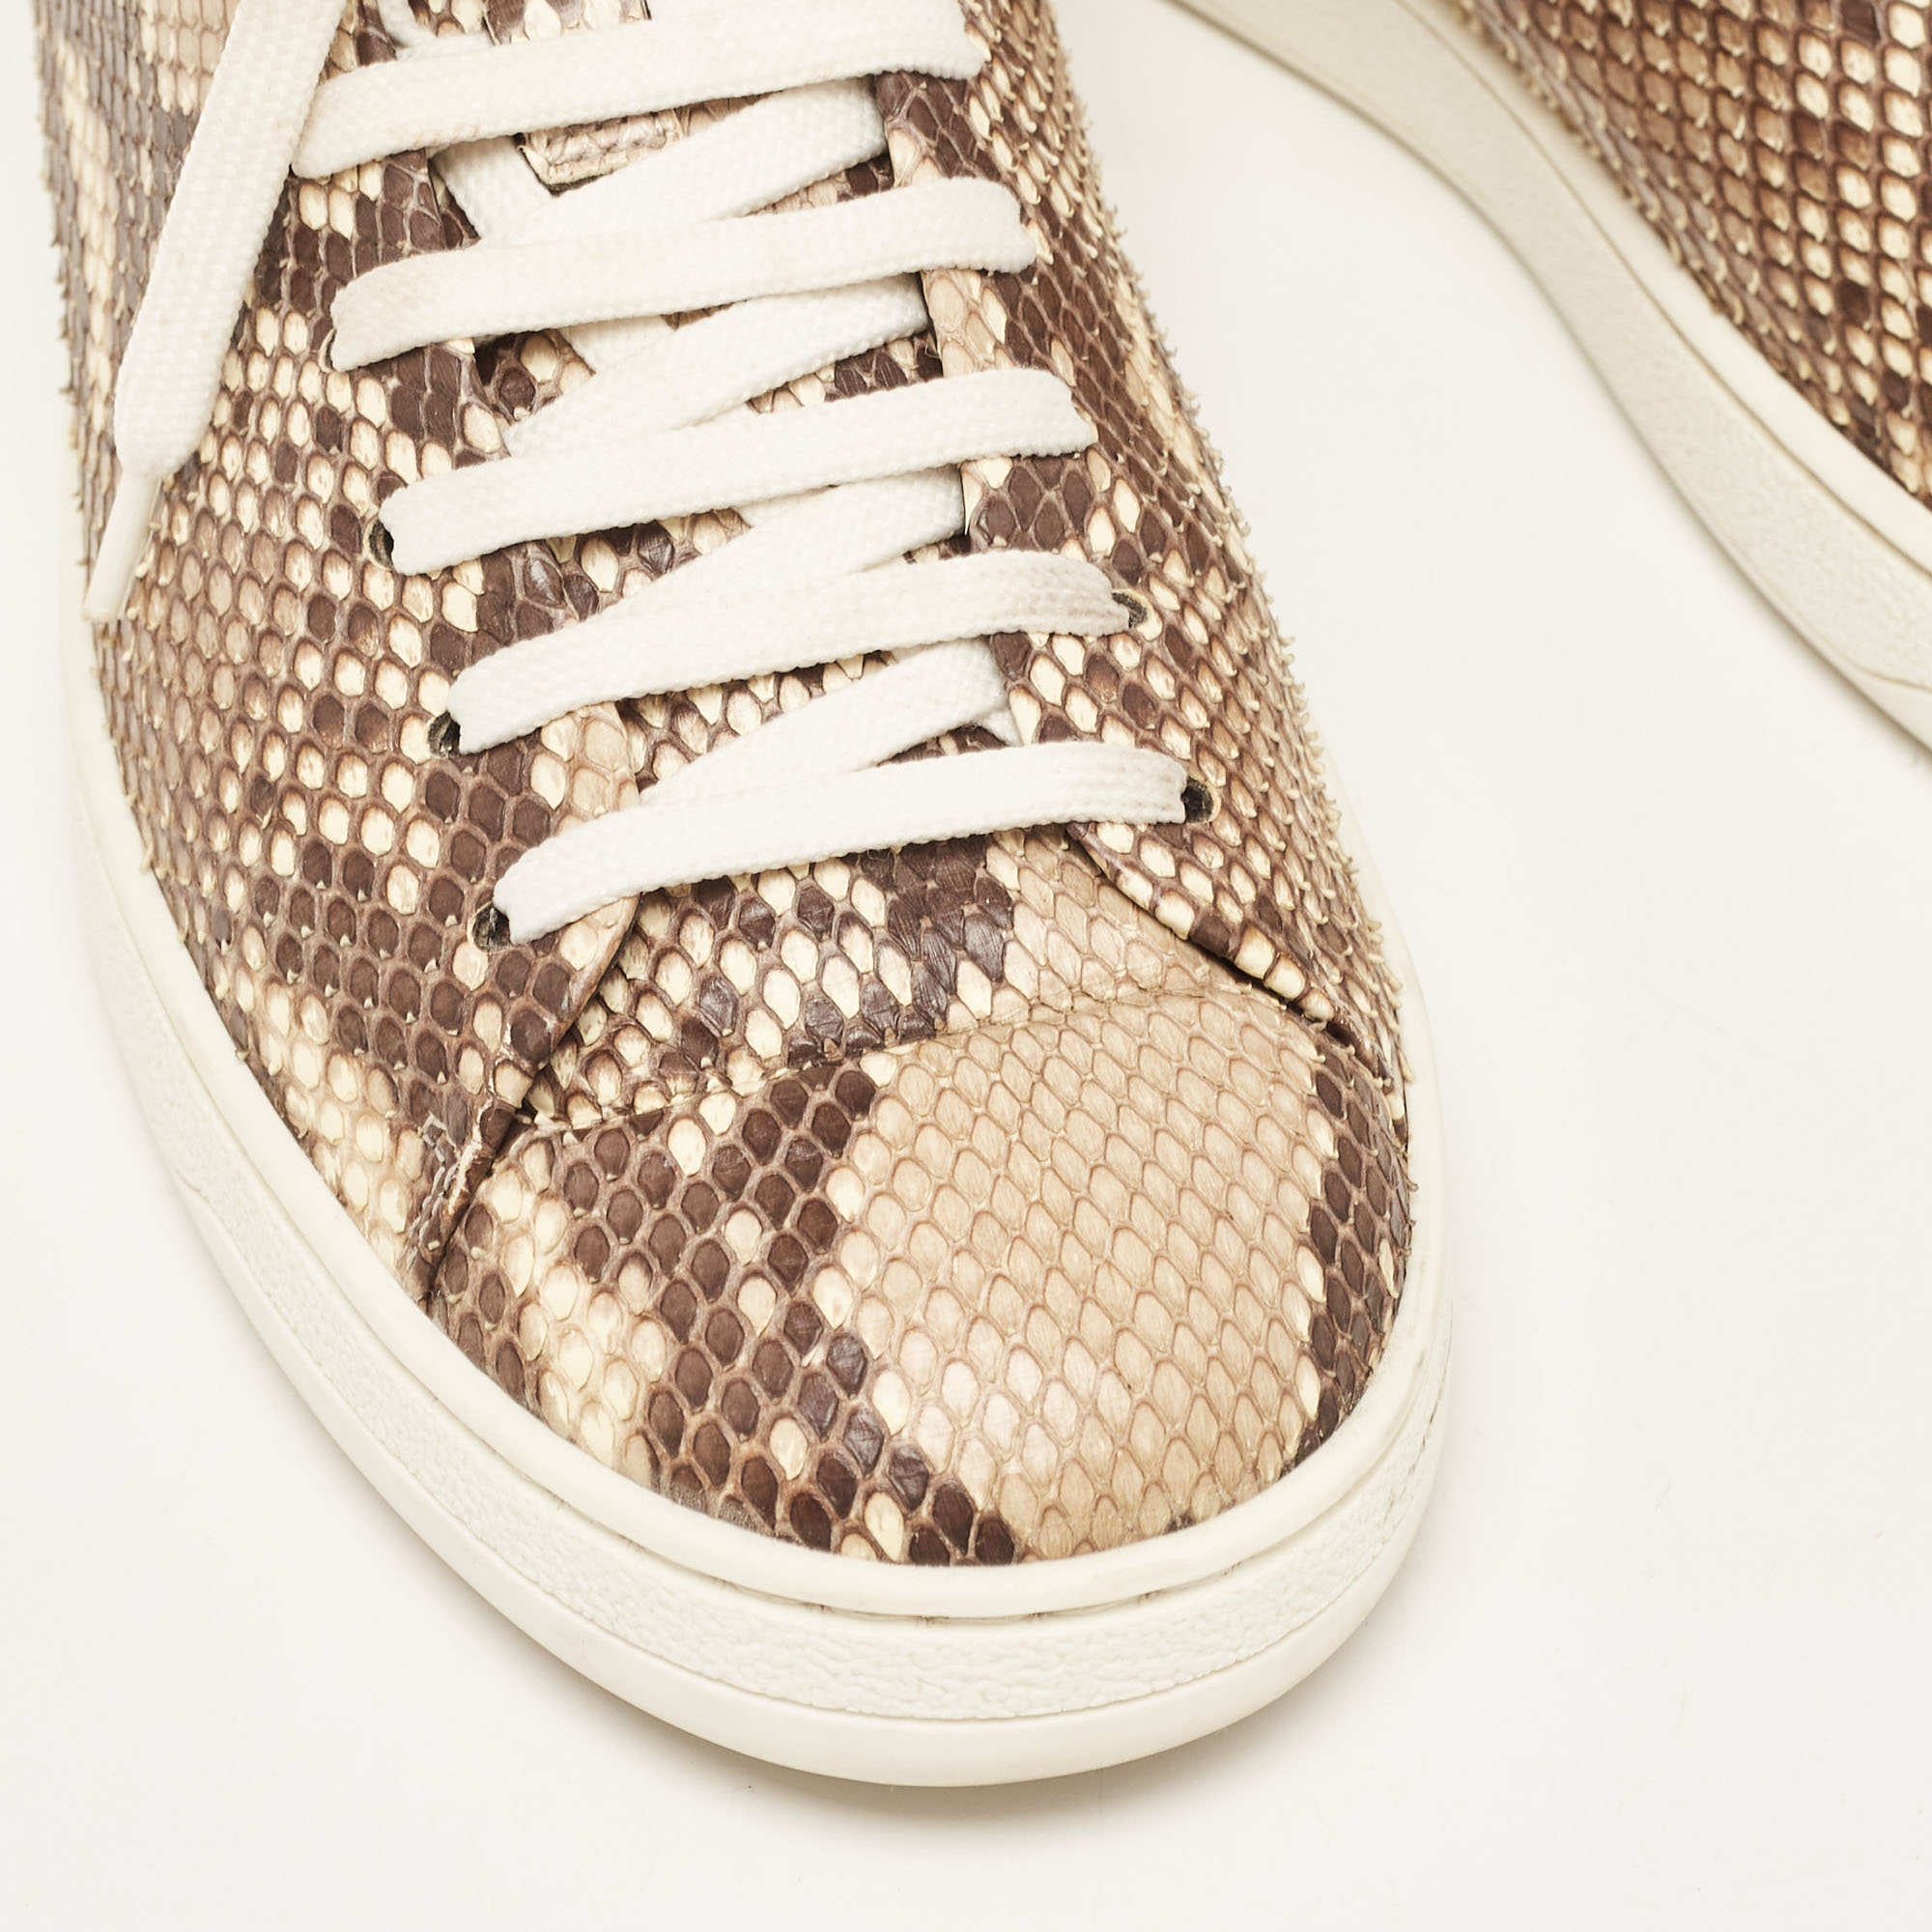 Louis Vuitton Brown Python Leather Frontrow  Sneakers Size 38